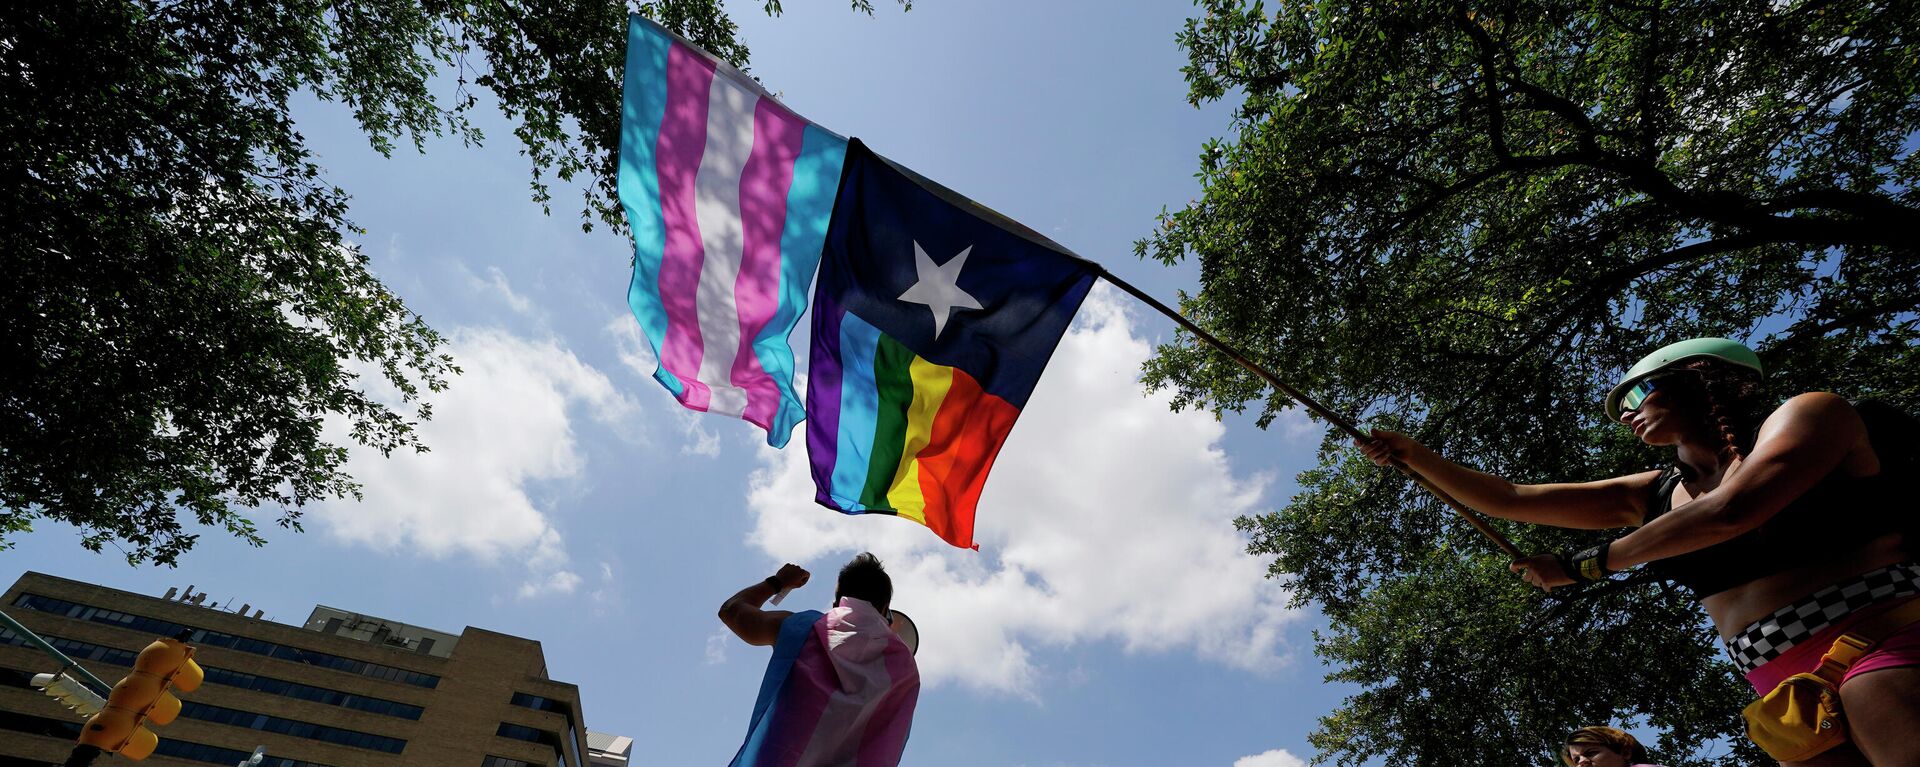 Demonstrators gather on the steps to the State Capitol to speak against transgender-related legislation bills being considered in the Texas Senate and Texas House, Thursday, May 20, 2021 in Austin, Texas. - Sputnik International, 1920, 11.03.2022